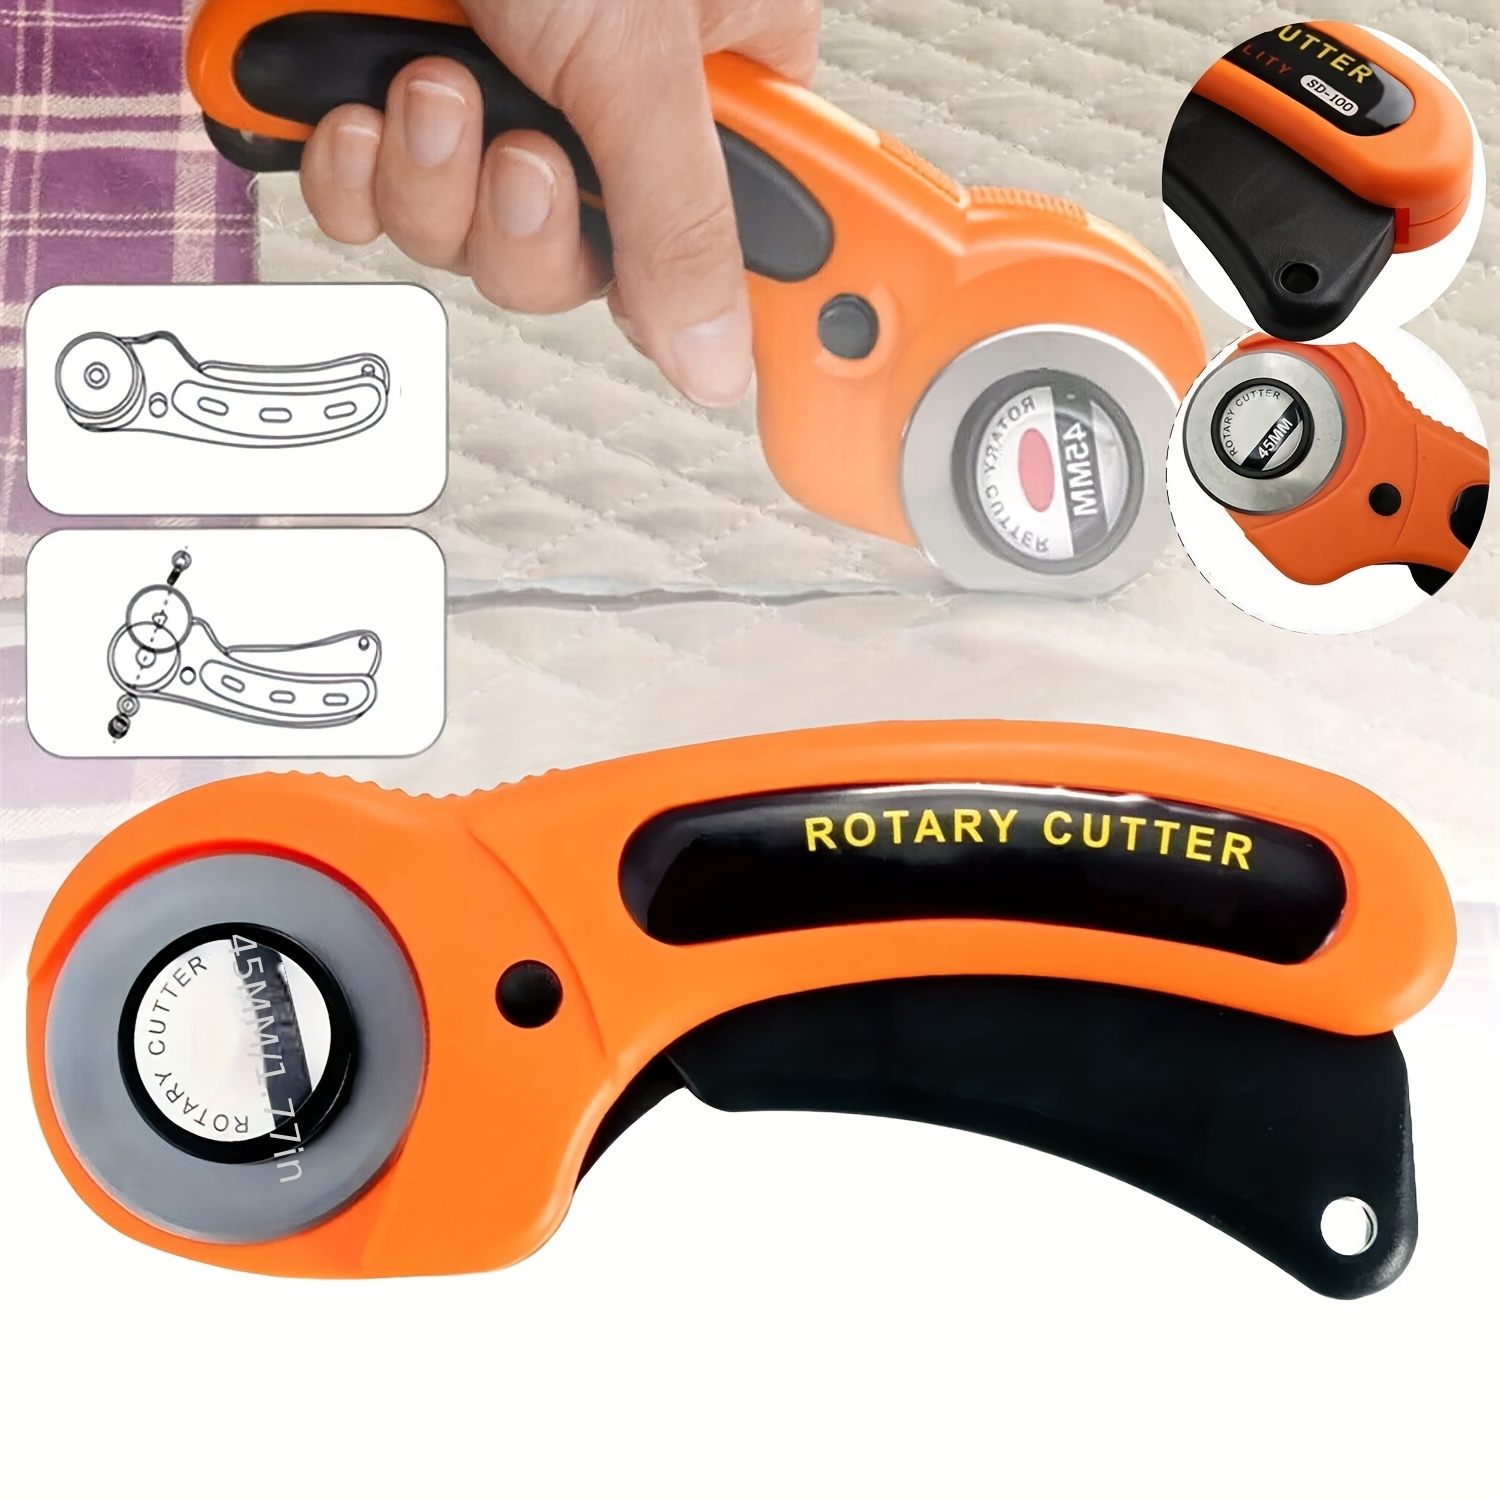 45mm Rotary Cutter with 5 Pcs Rotary Cutter Blades and A5 Cutting